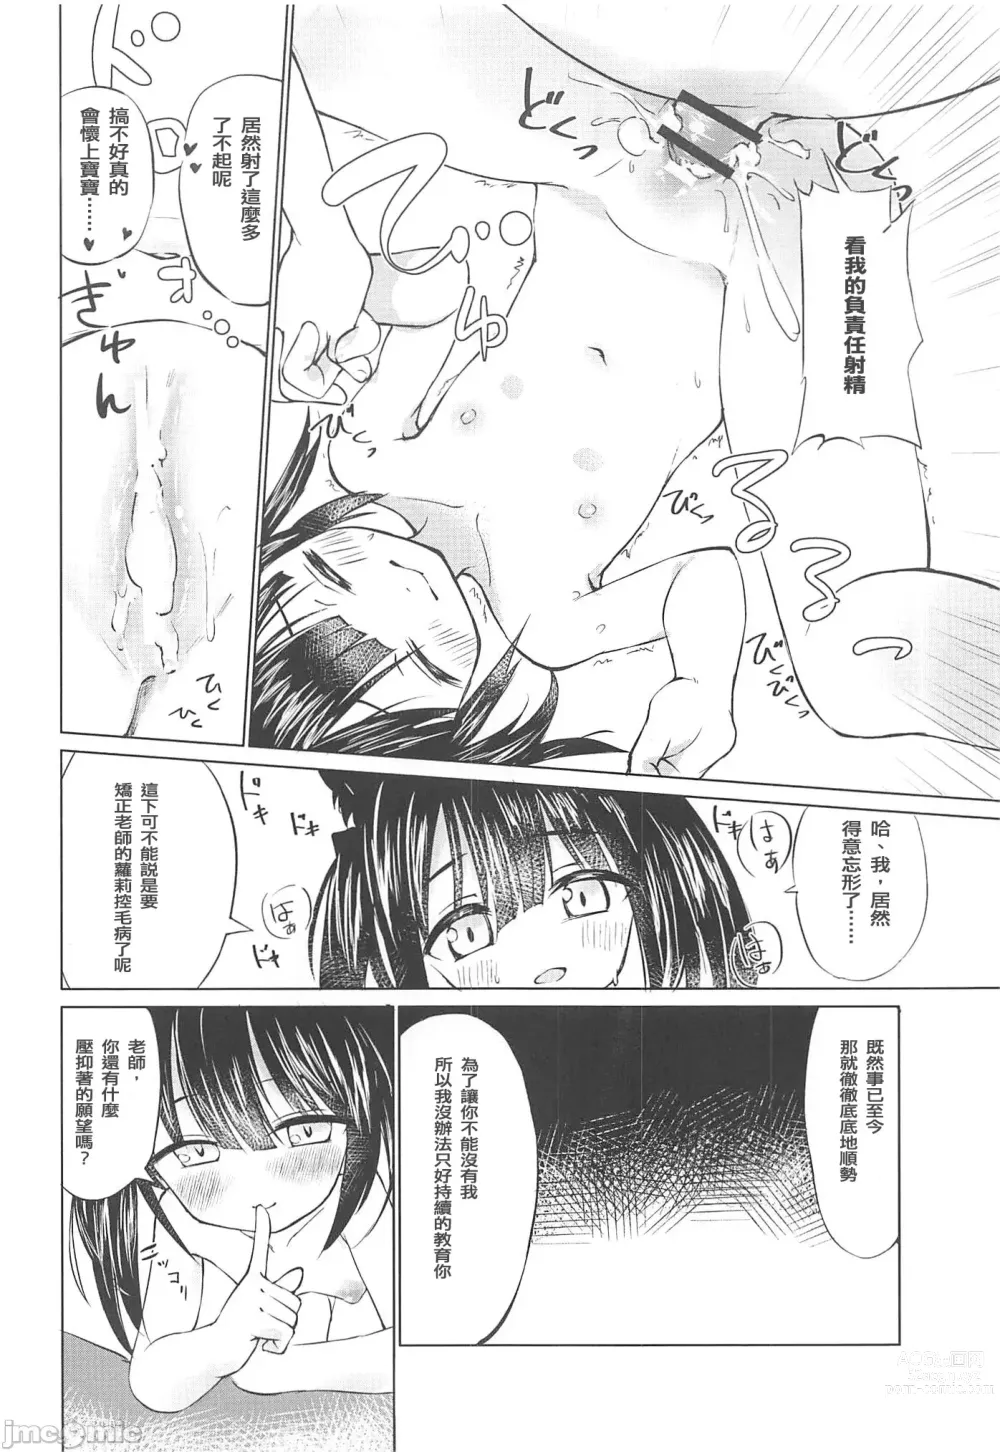 Page 15 of doujinshi Youjo Archive